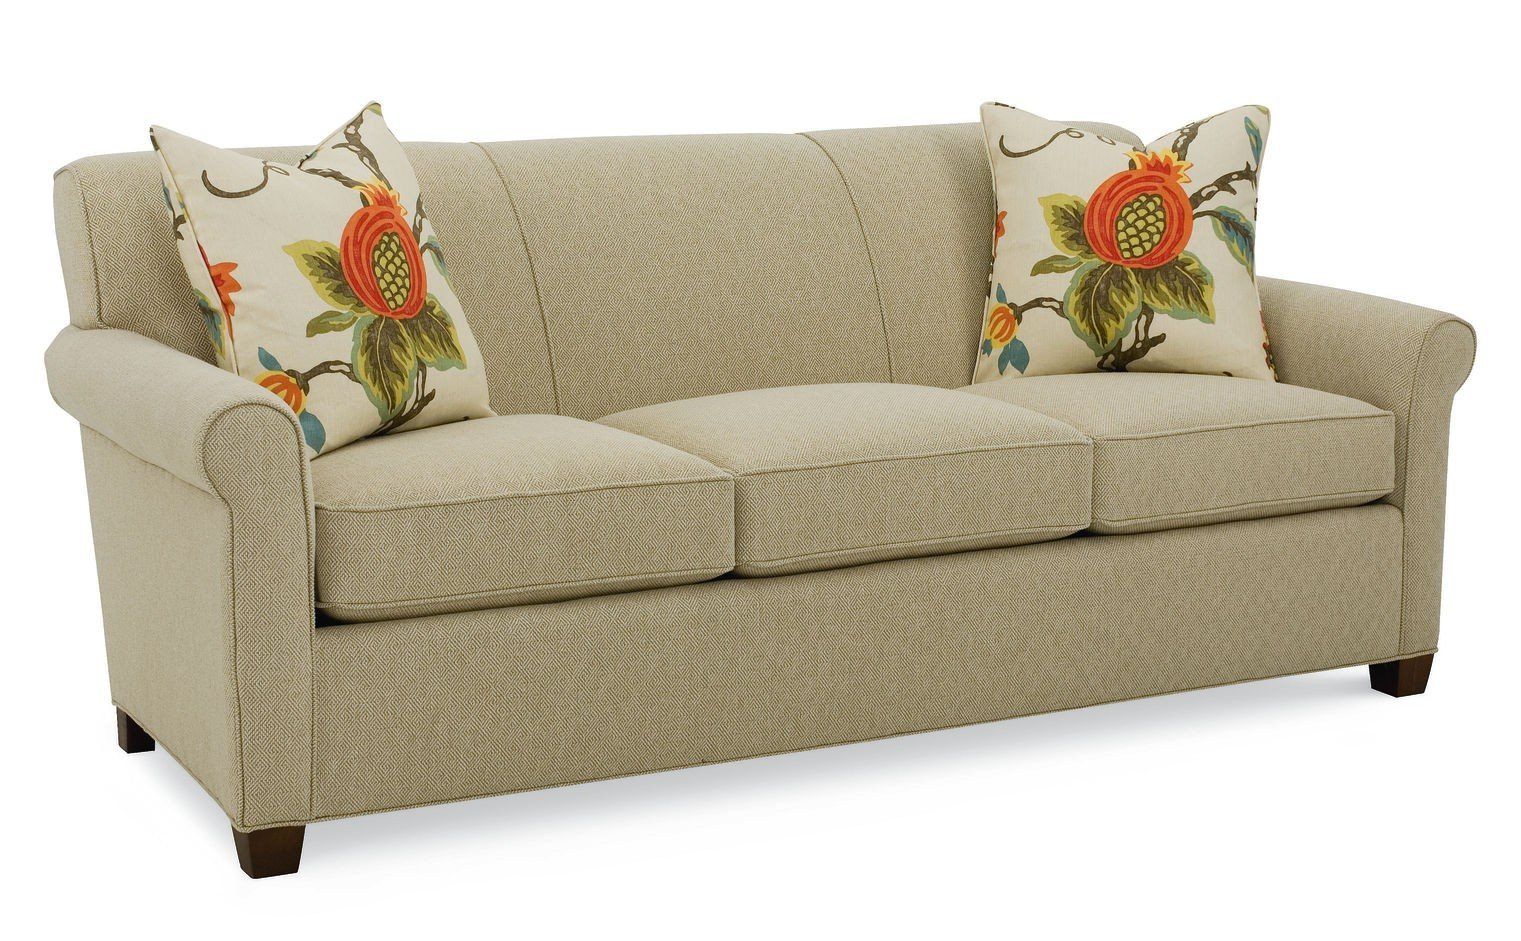 a beige couch with floral pillows on it